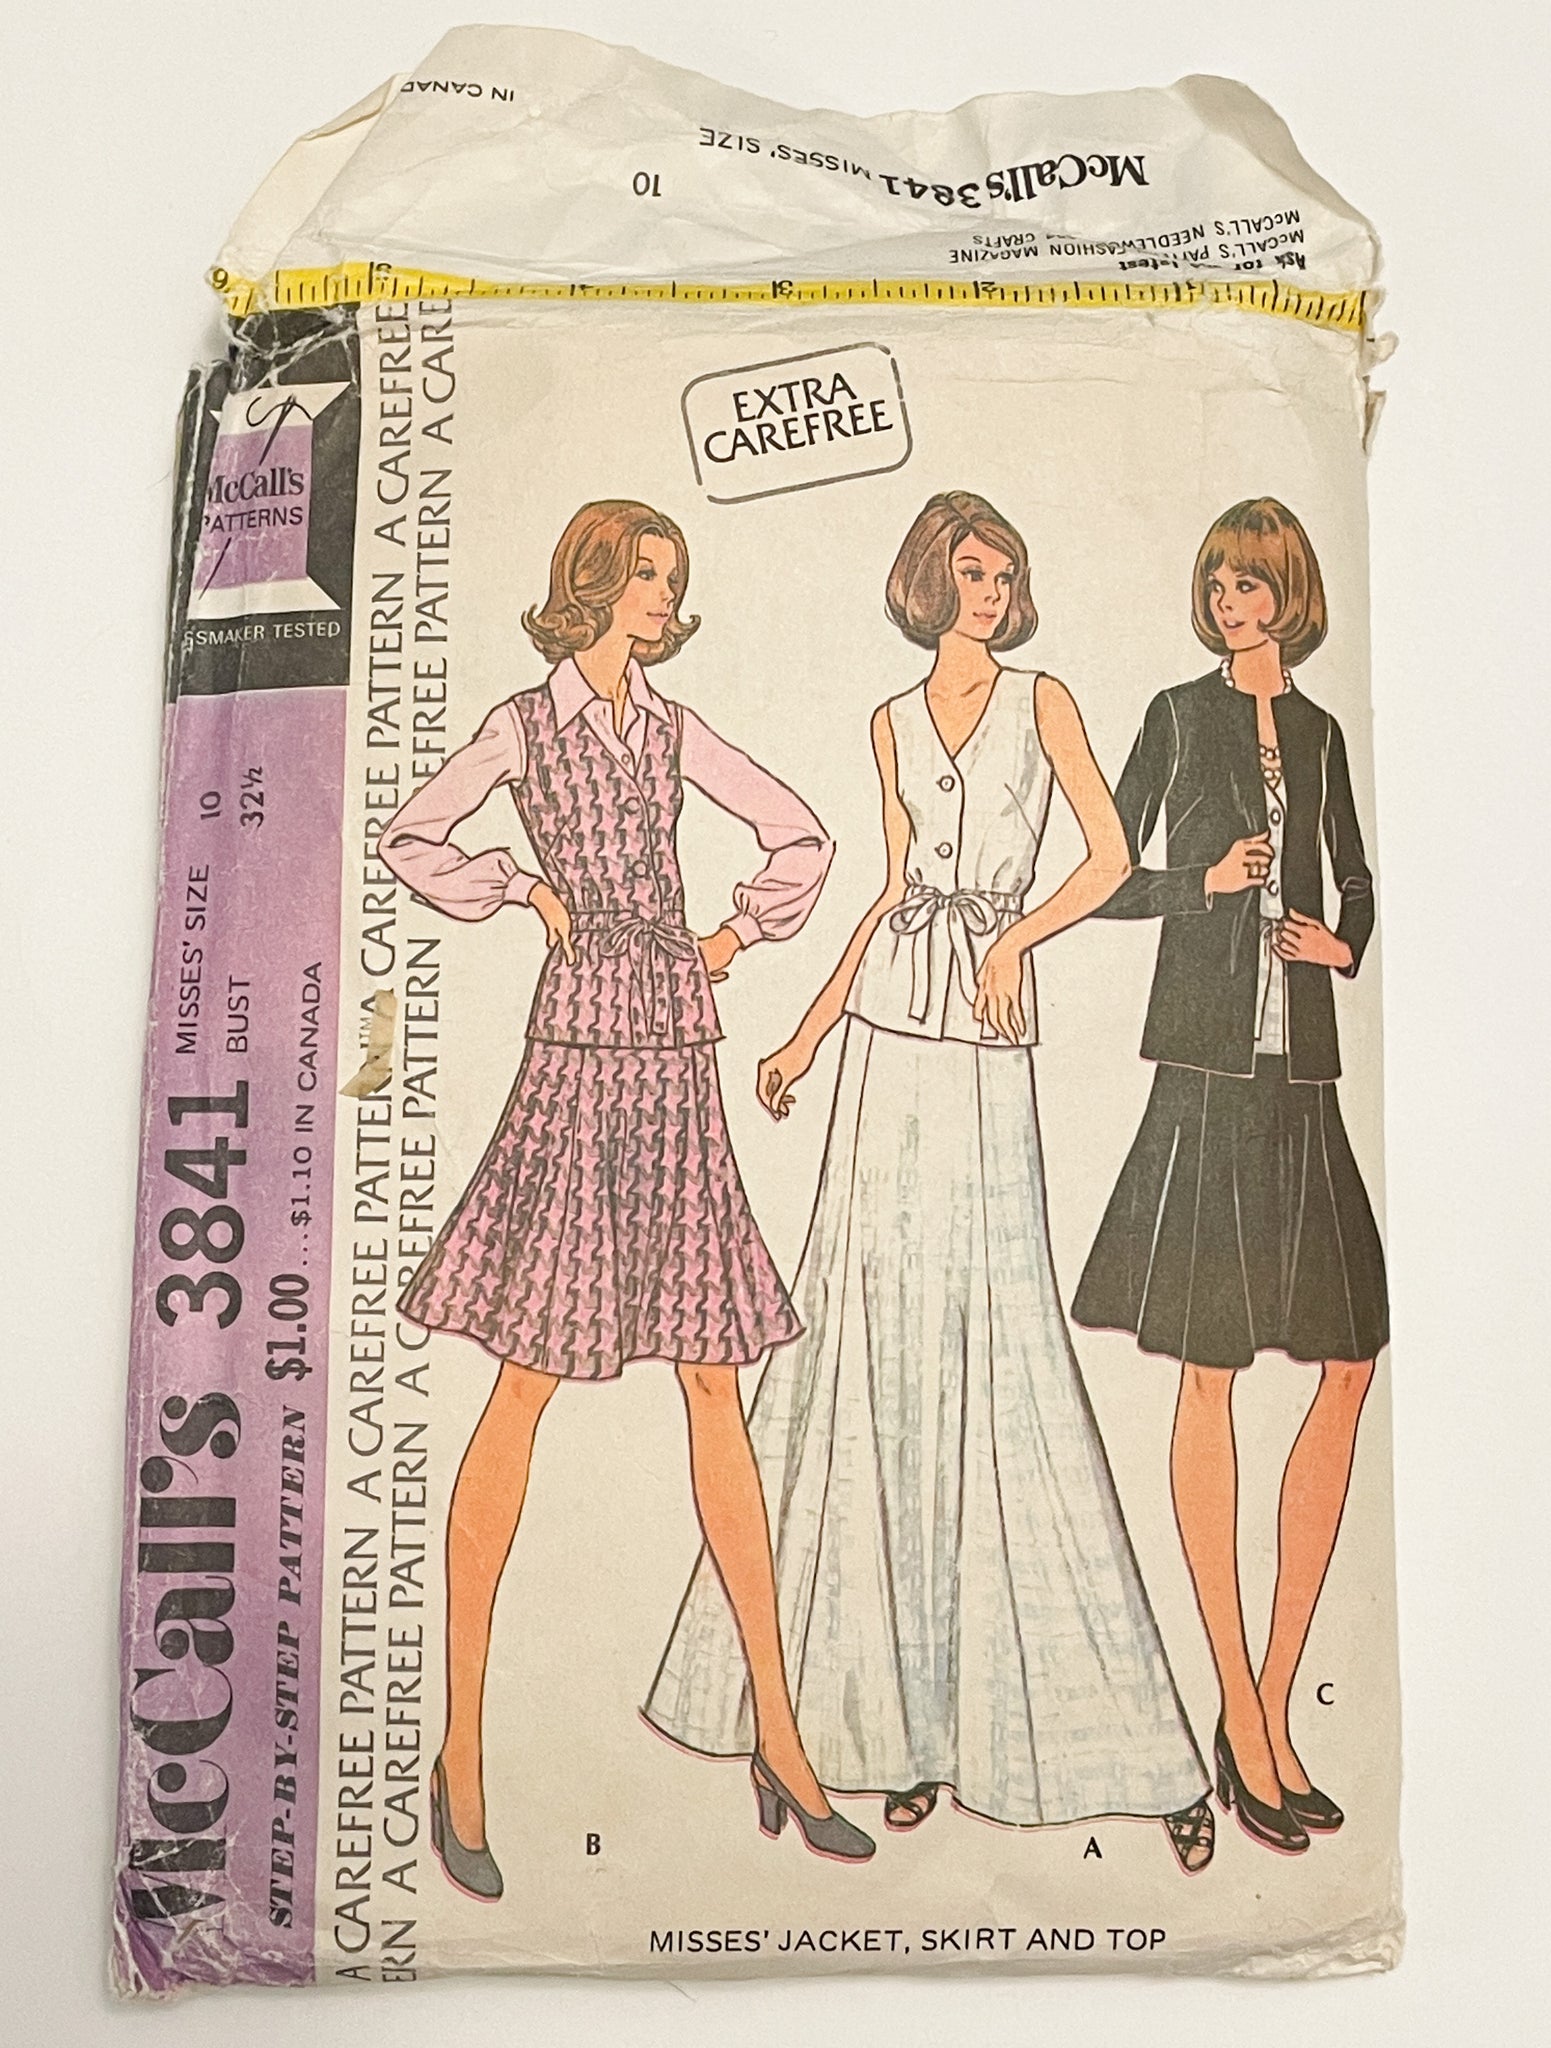 SALE 1973 McCall's 3841 Pattern - Jacket, Skirt and Top